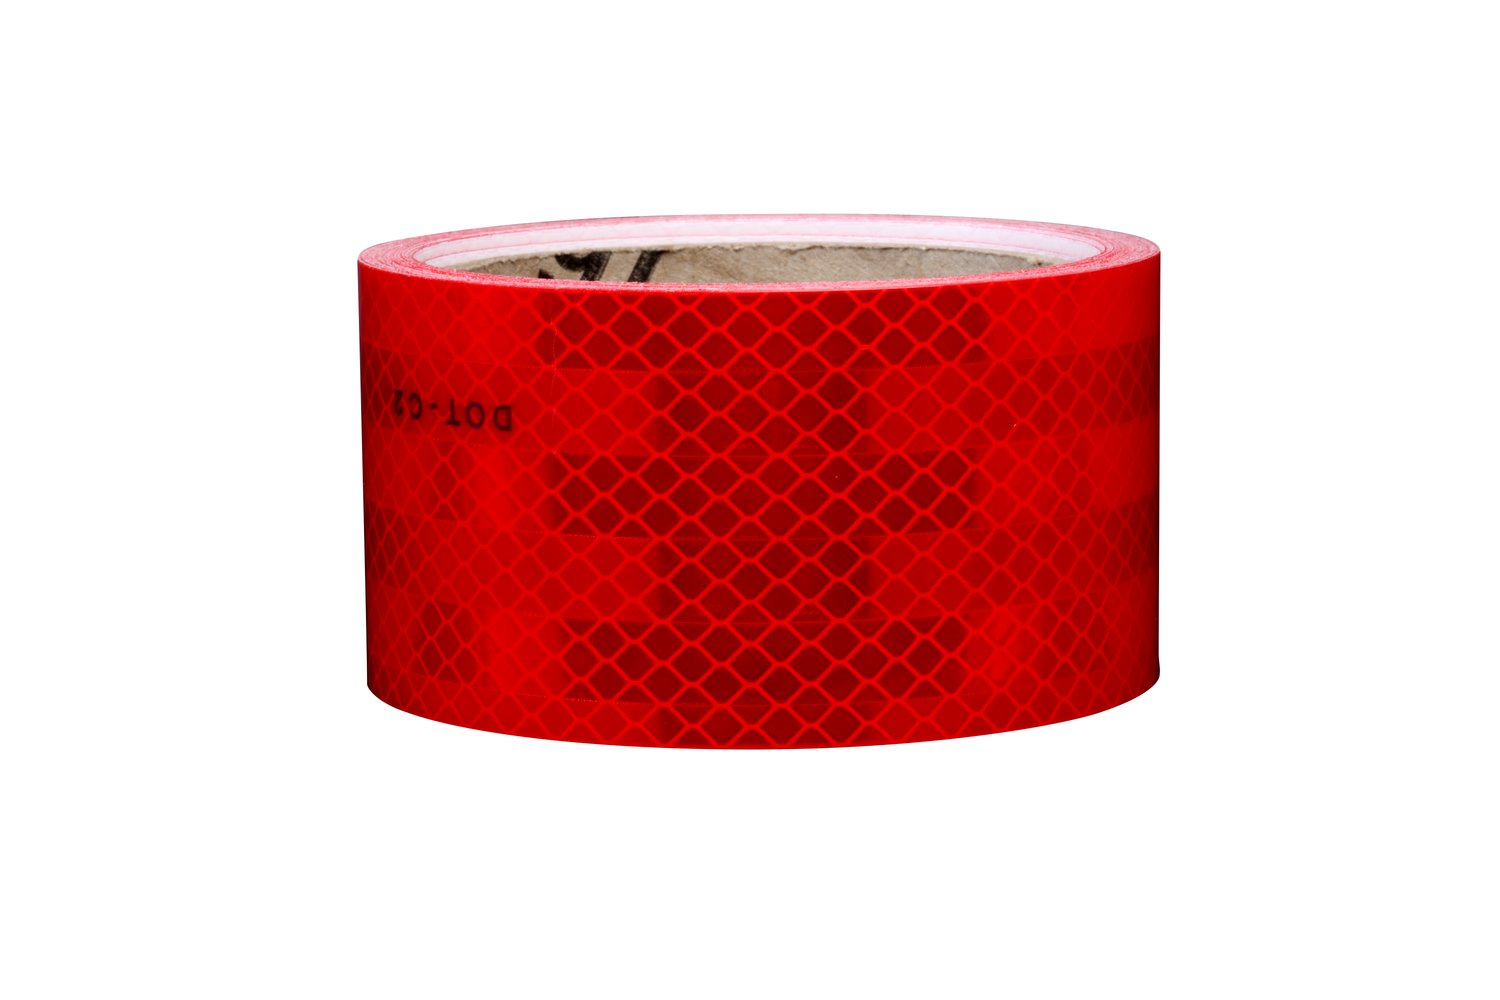 7010389113 - 3M Diamond Grade Conspicuity Markings 983-72, Red, DOT, 1.75 in x 50
yd, Kiss-cut every 1.75 in and 2.75 in